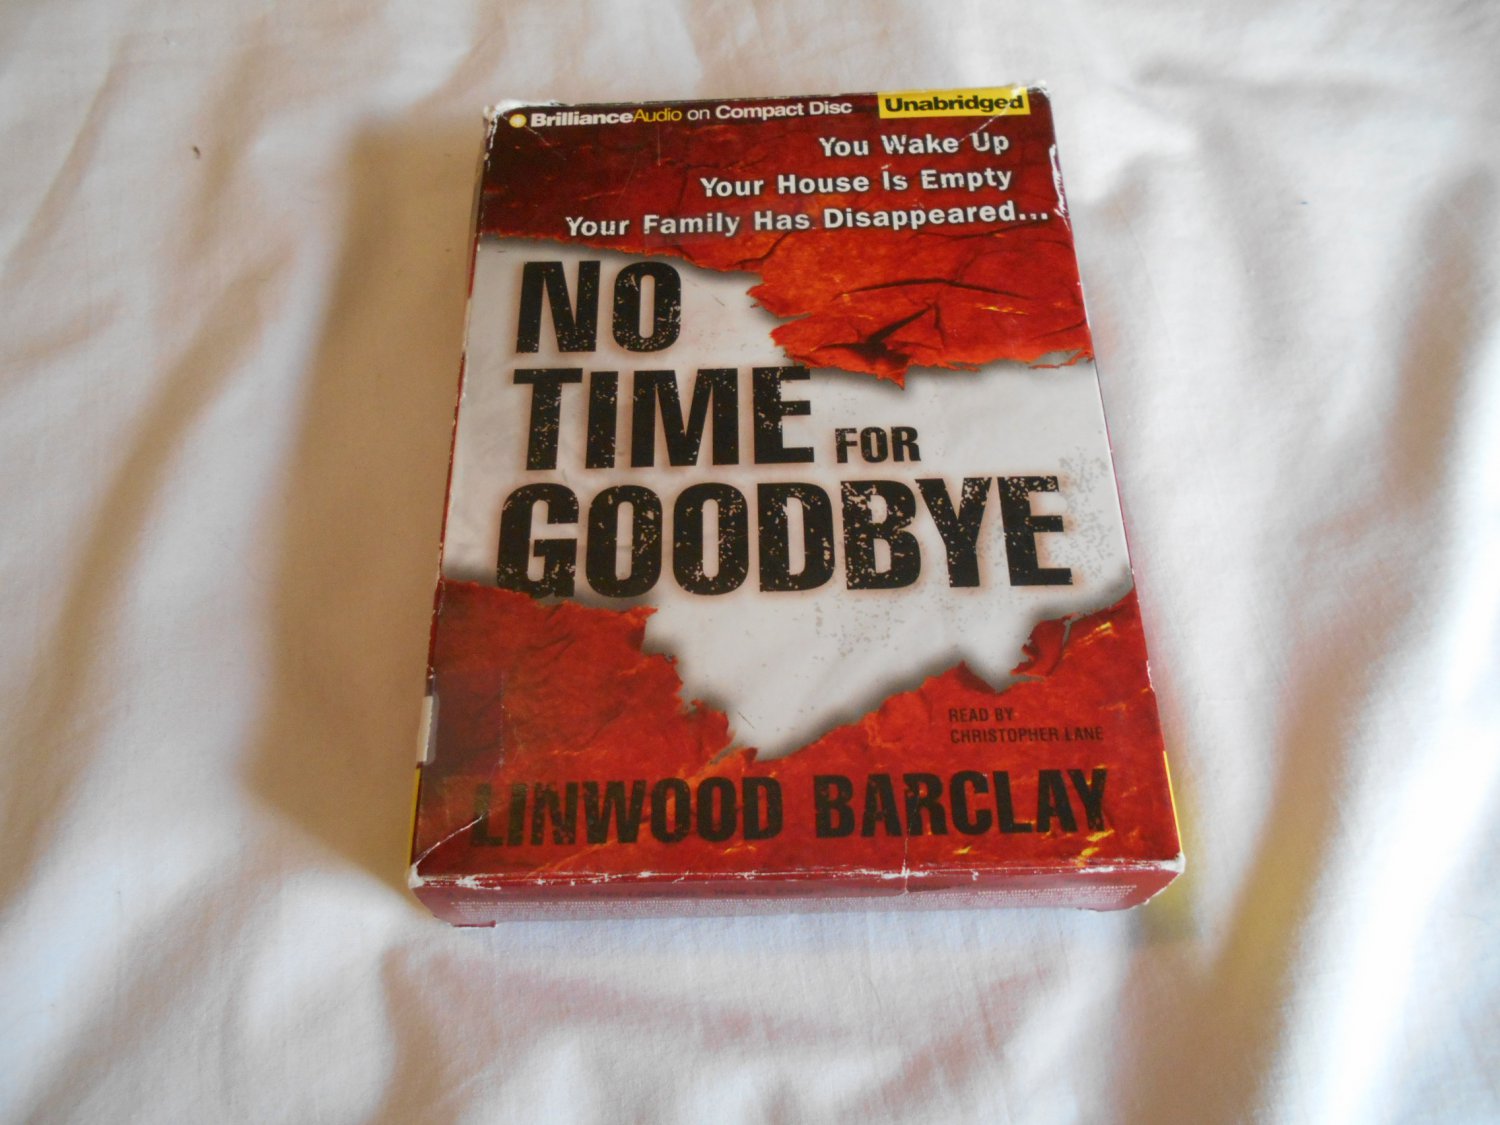 No Time for Goodbye by Linwood Barclay Christopher Lane (2007) 10 CDs, Mystery, Thriller